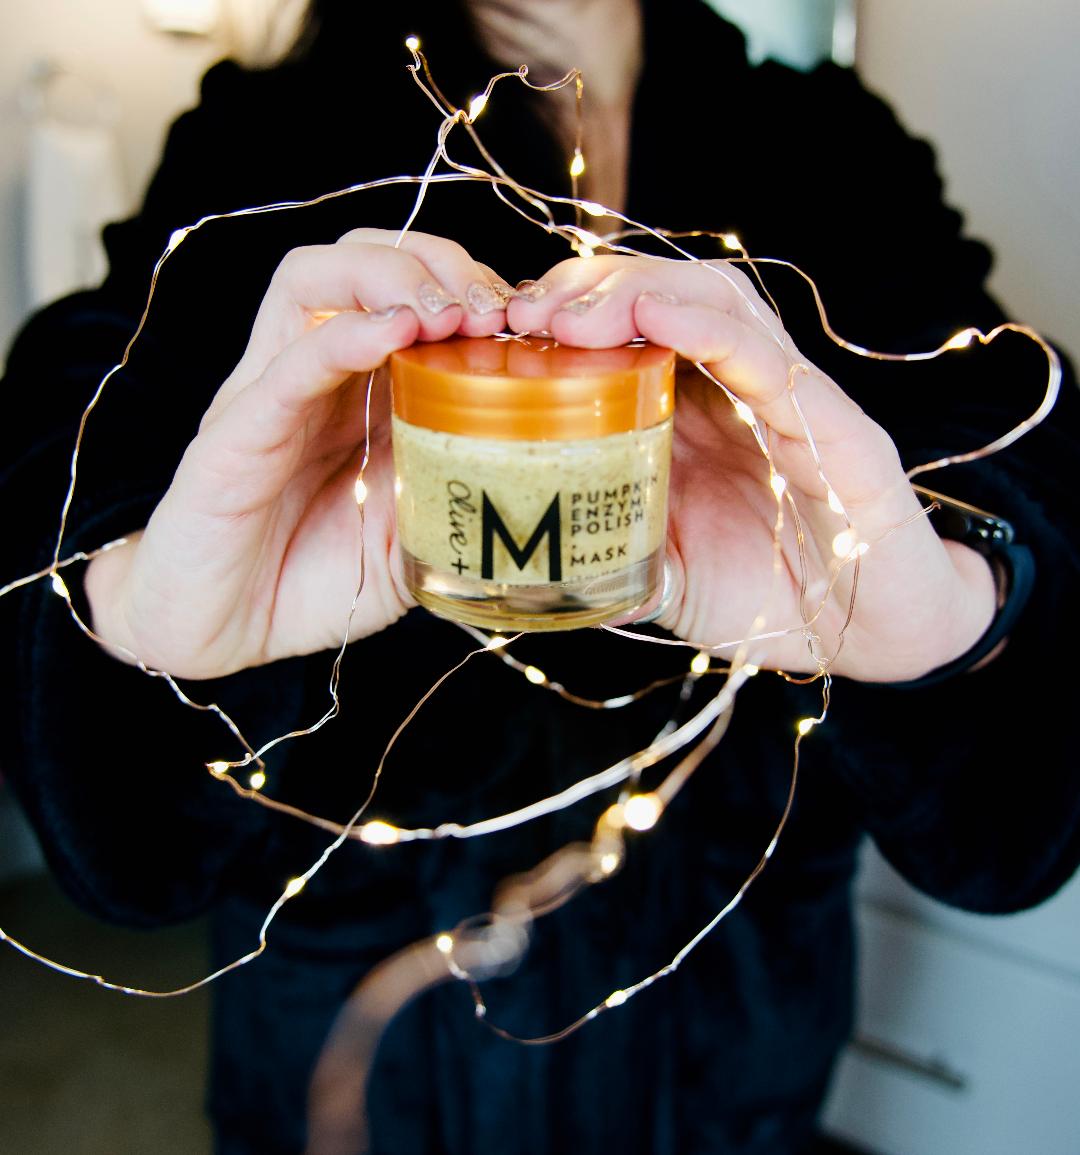 Olive and M Pumpkin Spice Mask